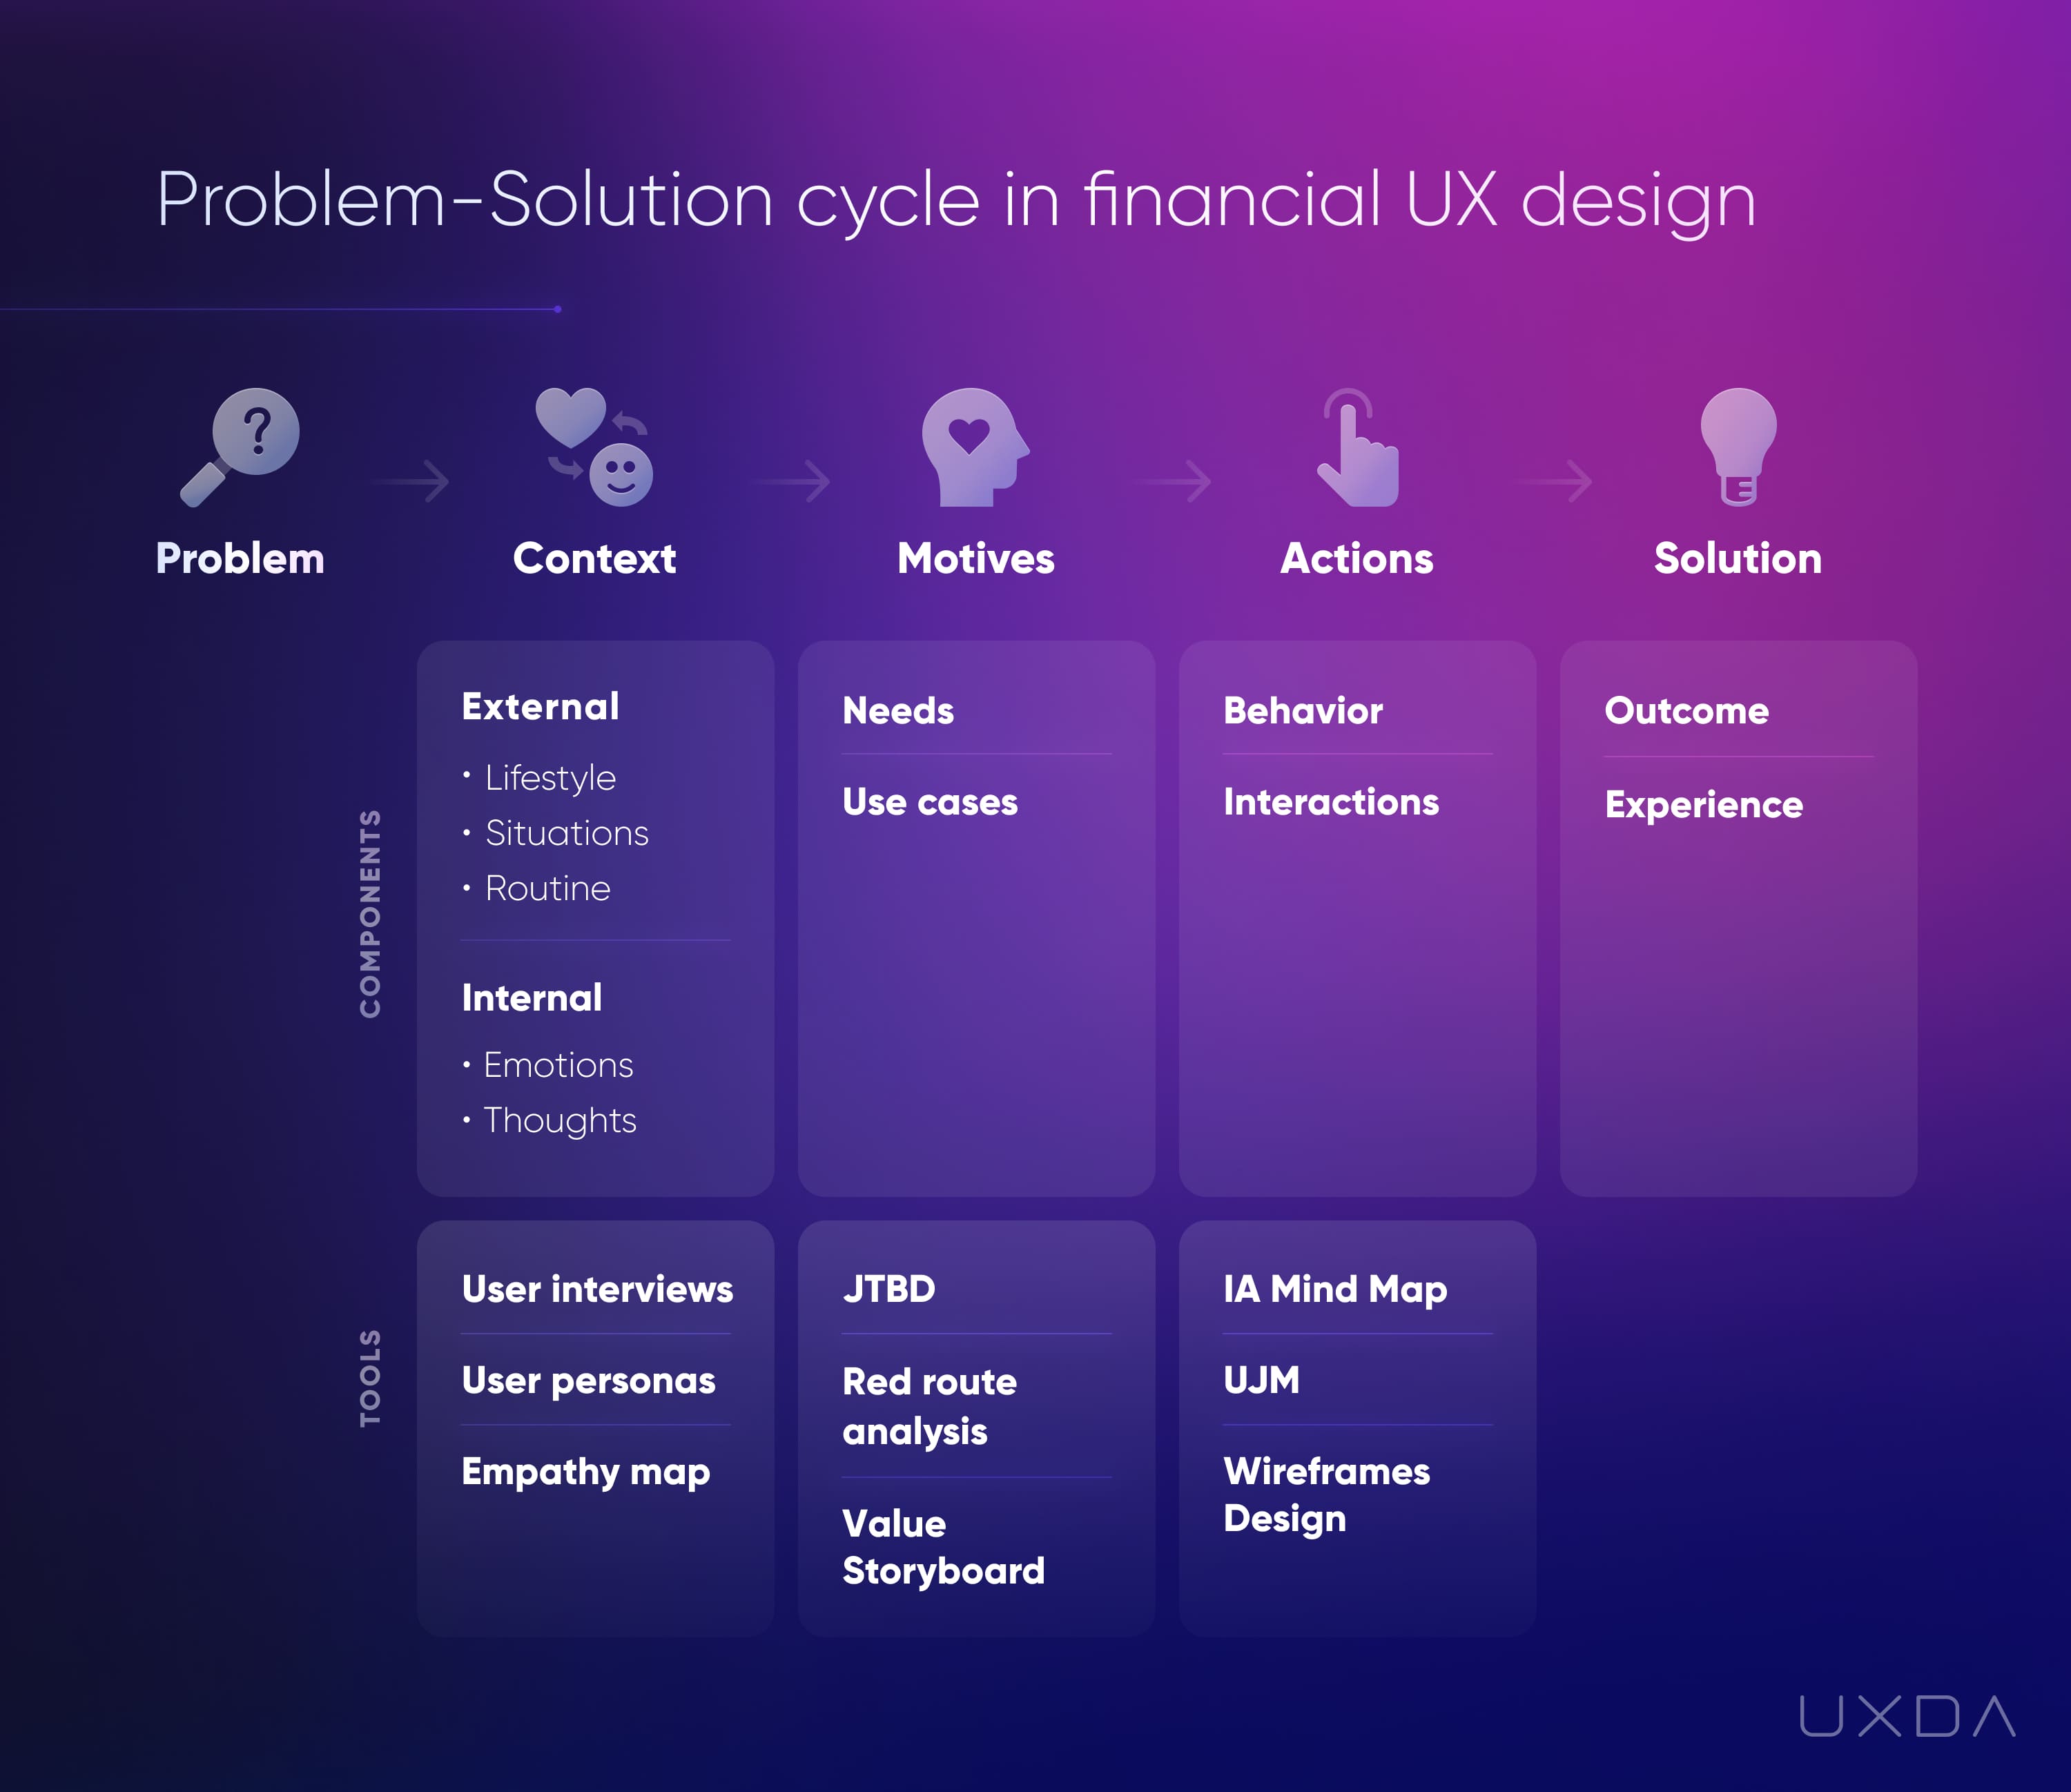 How to improve customer experience in banking - problem solution cycle